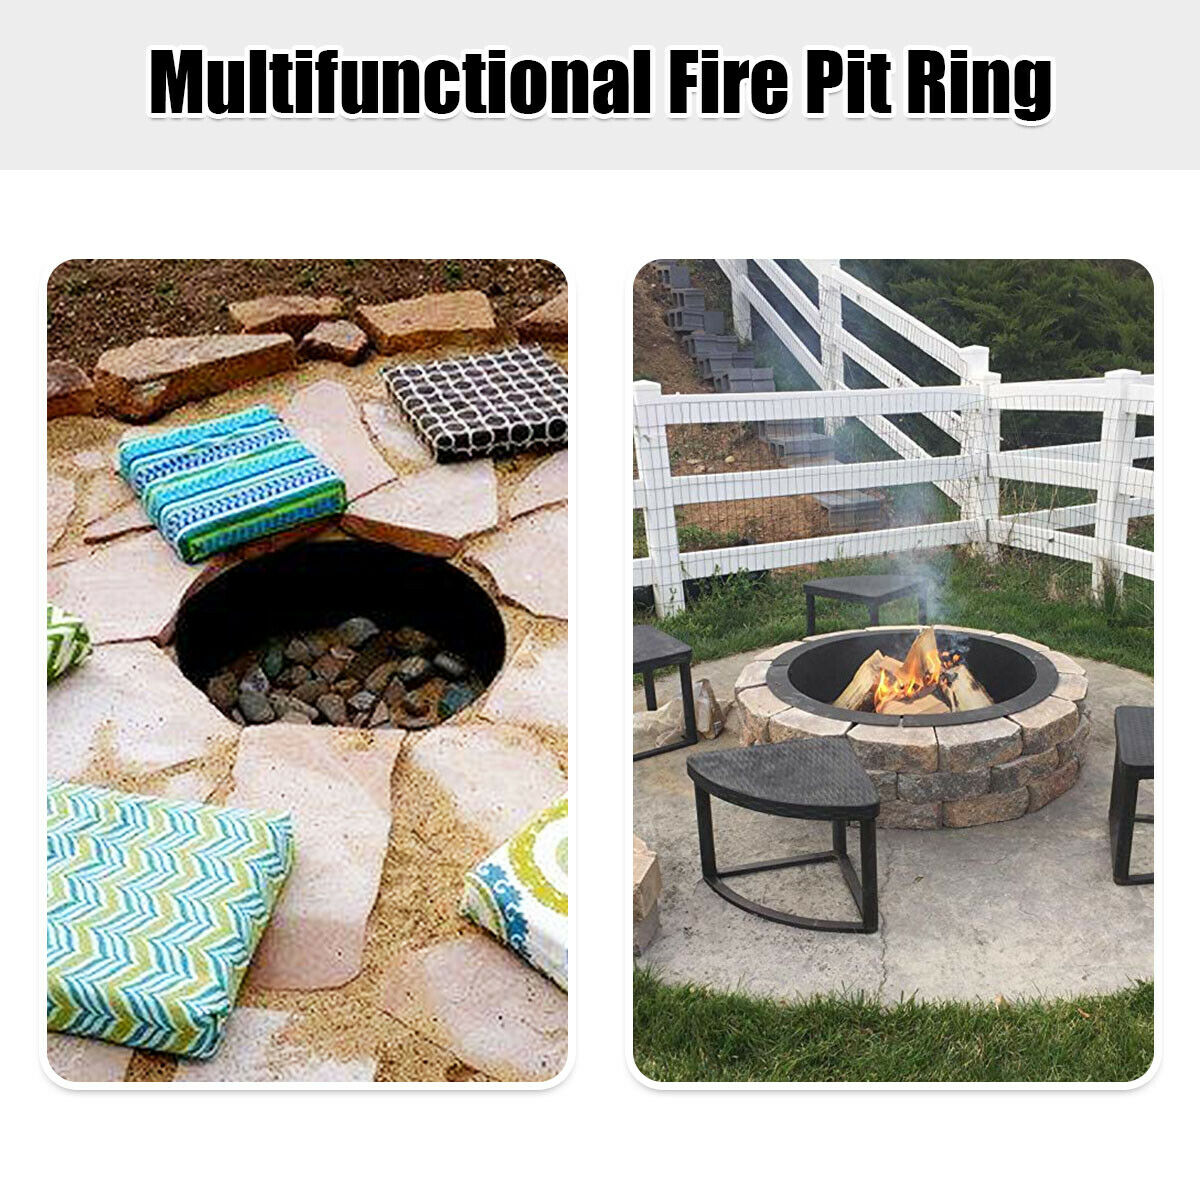 Gymax 36 Inch Round Steel Fire Pit Ring Liner DIY Wood Burning Insert - image 4 of 10